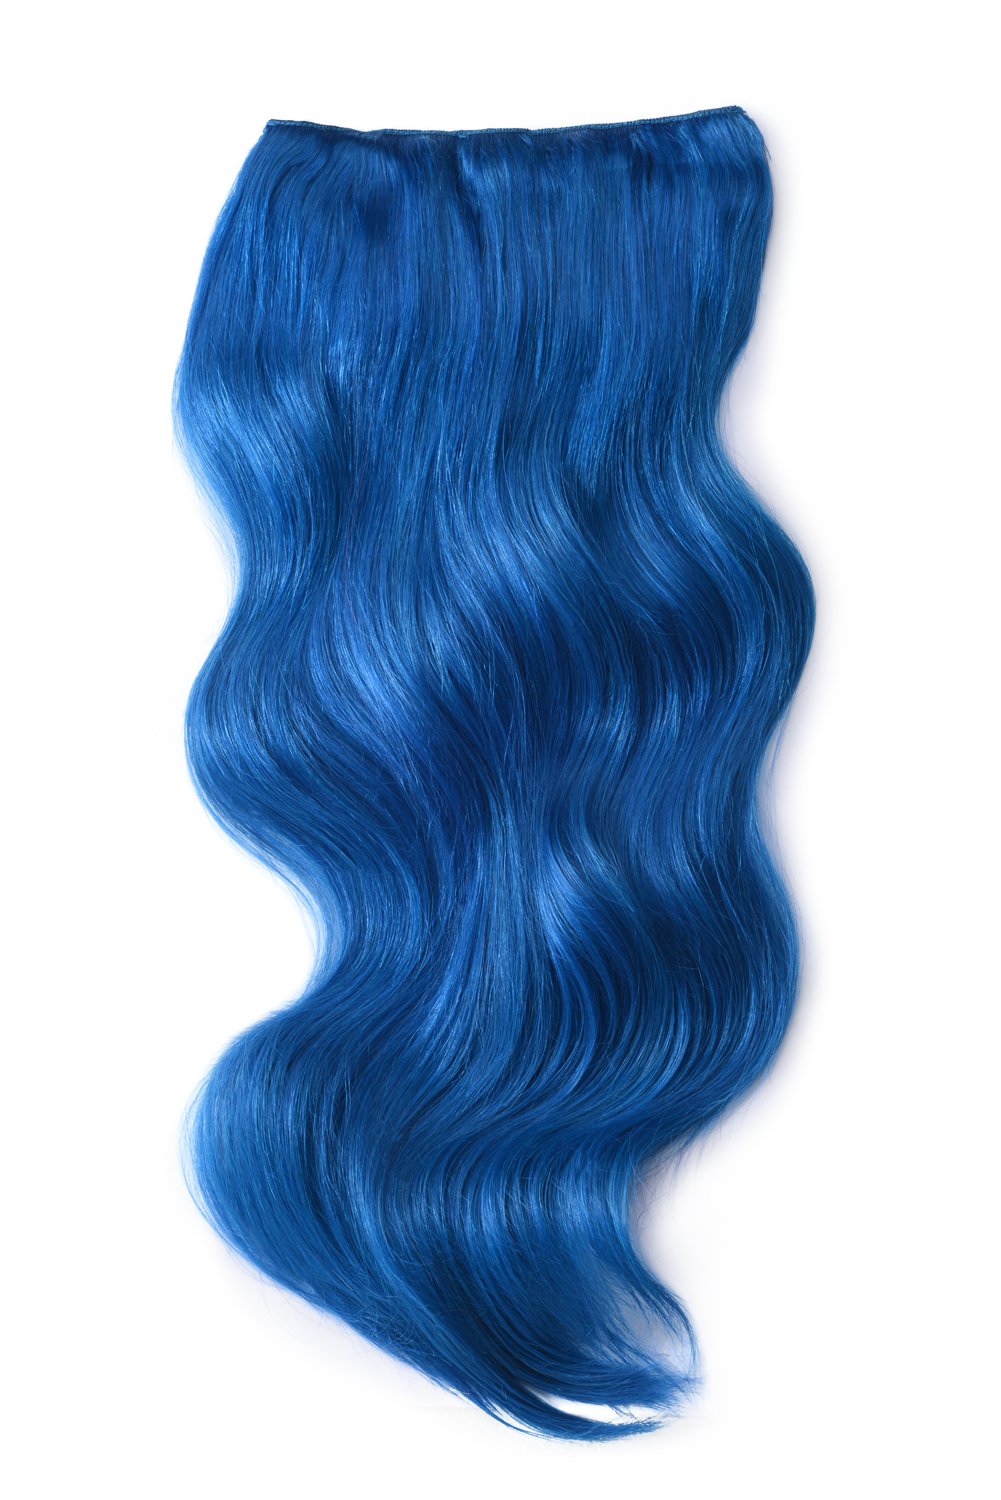 Double Wefted Full Head Remy Clip in Human Hair Extensions - Blue